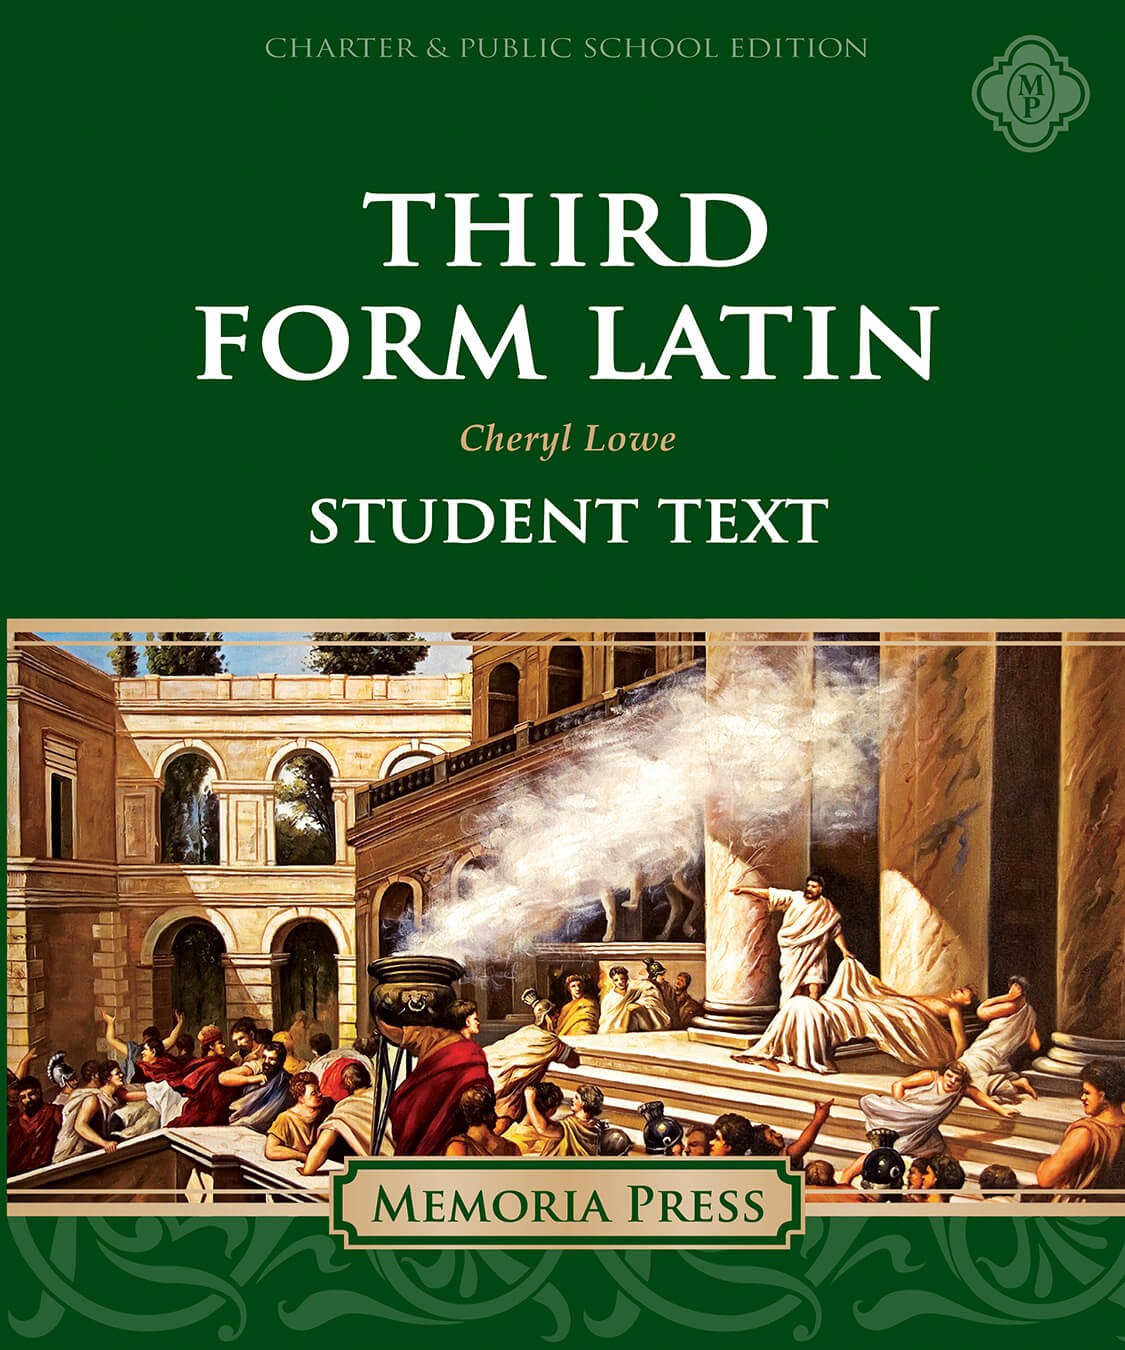 Third Form Latin Student Text-Charter/Public Edition